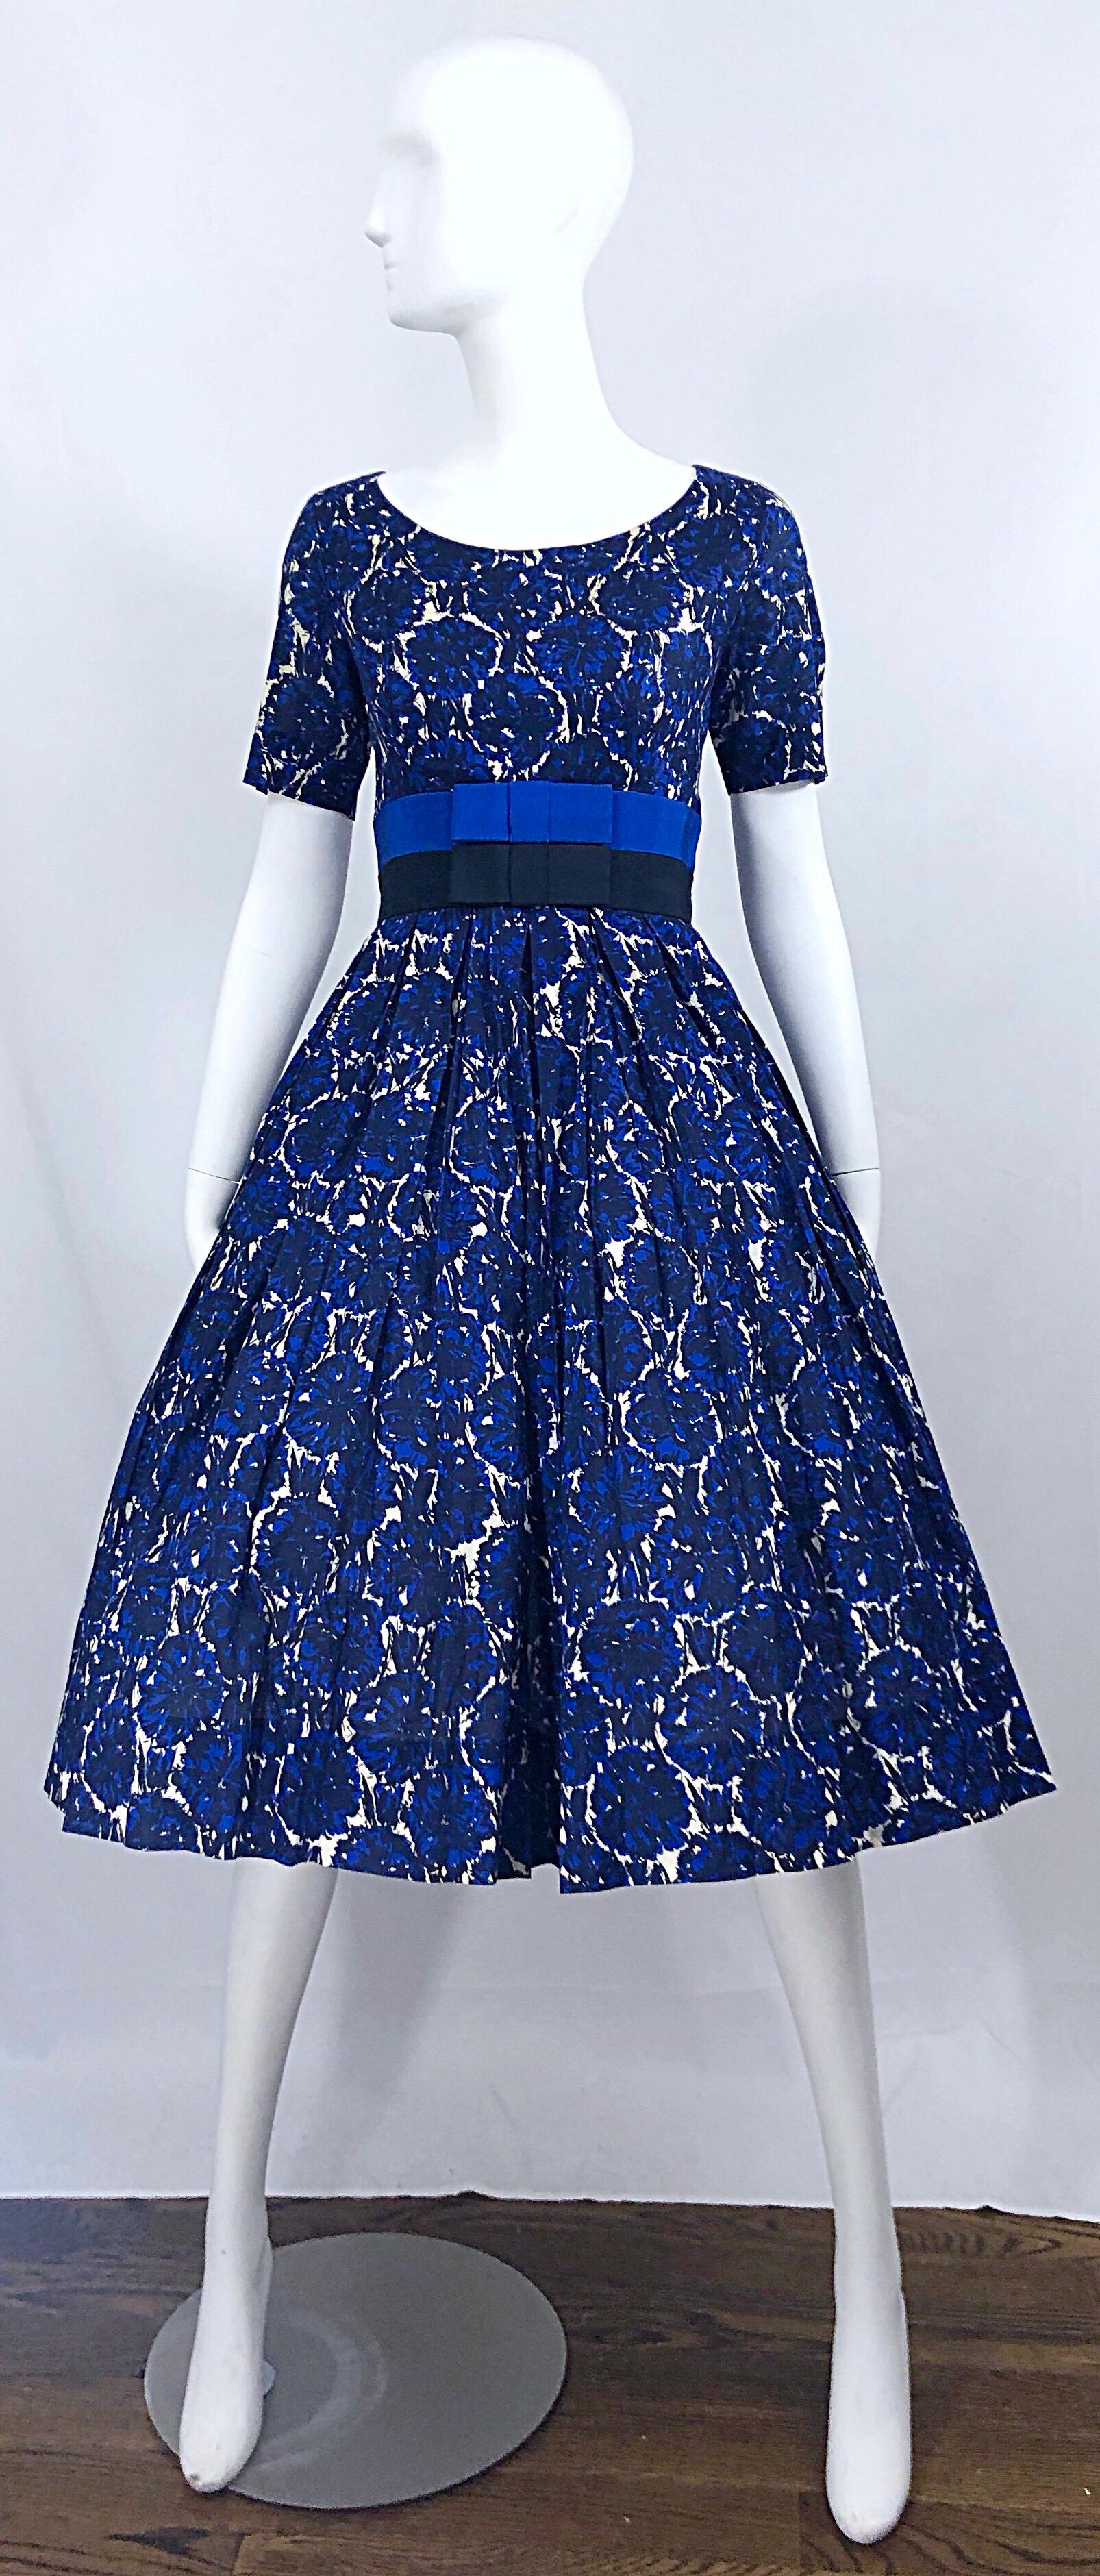 Phenomenal vintage 50s BONWIT TELLER demi couture blue abstract flower print fit n' flare cotton dress! Features a fitted bodice, with two bands of silk grosgrain bows in blue and black. Full skirt has plenty of room to accomodate a crinoline for